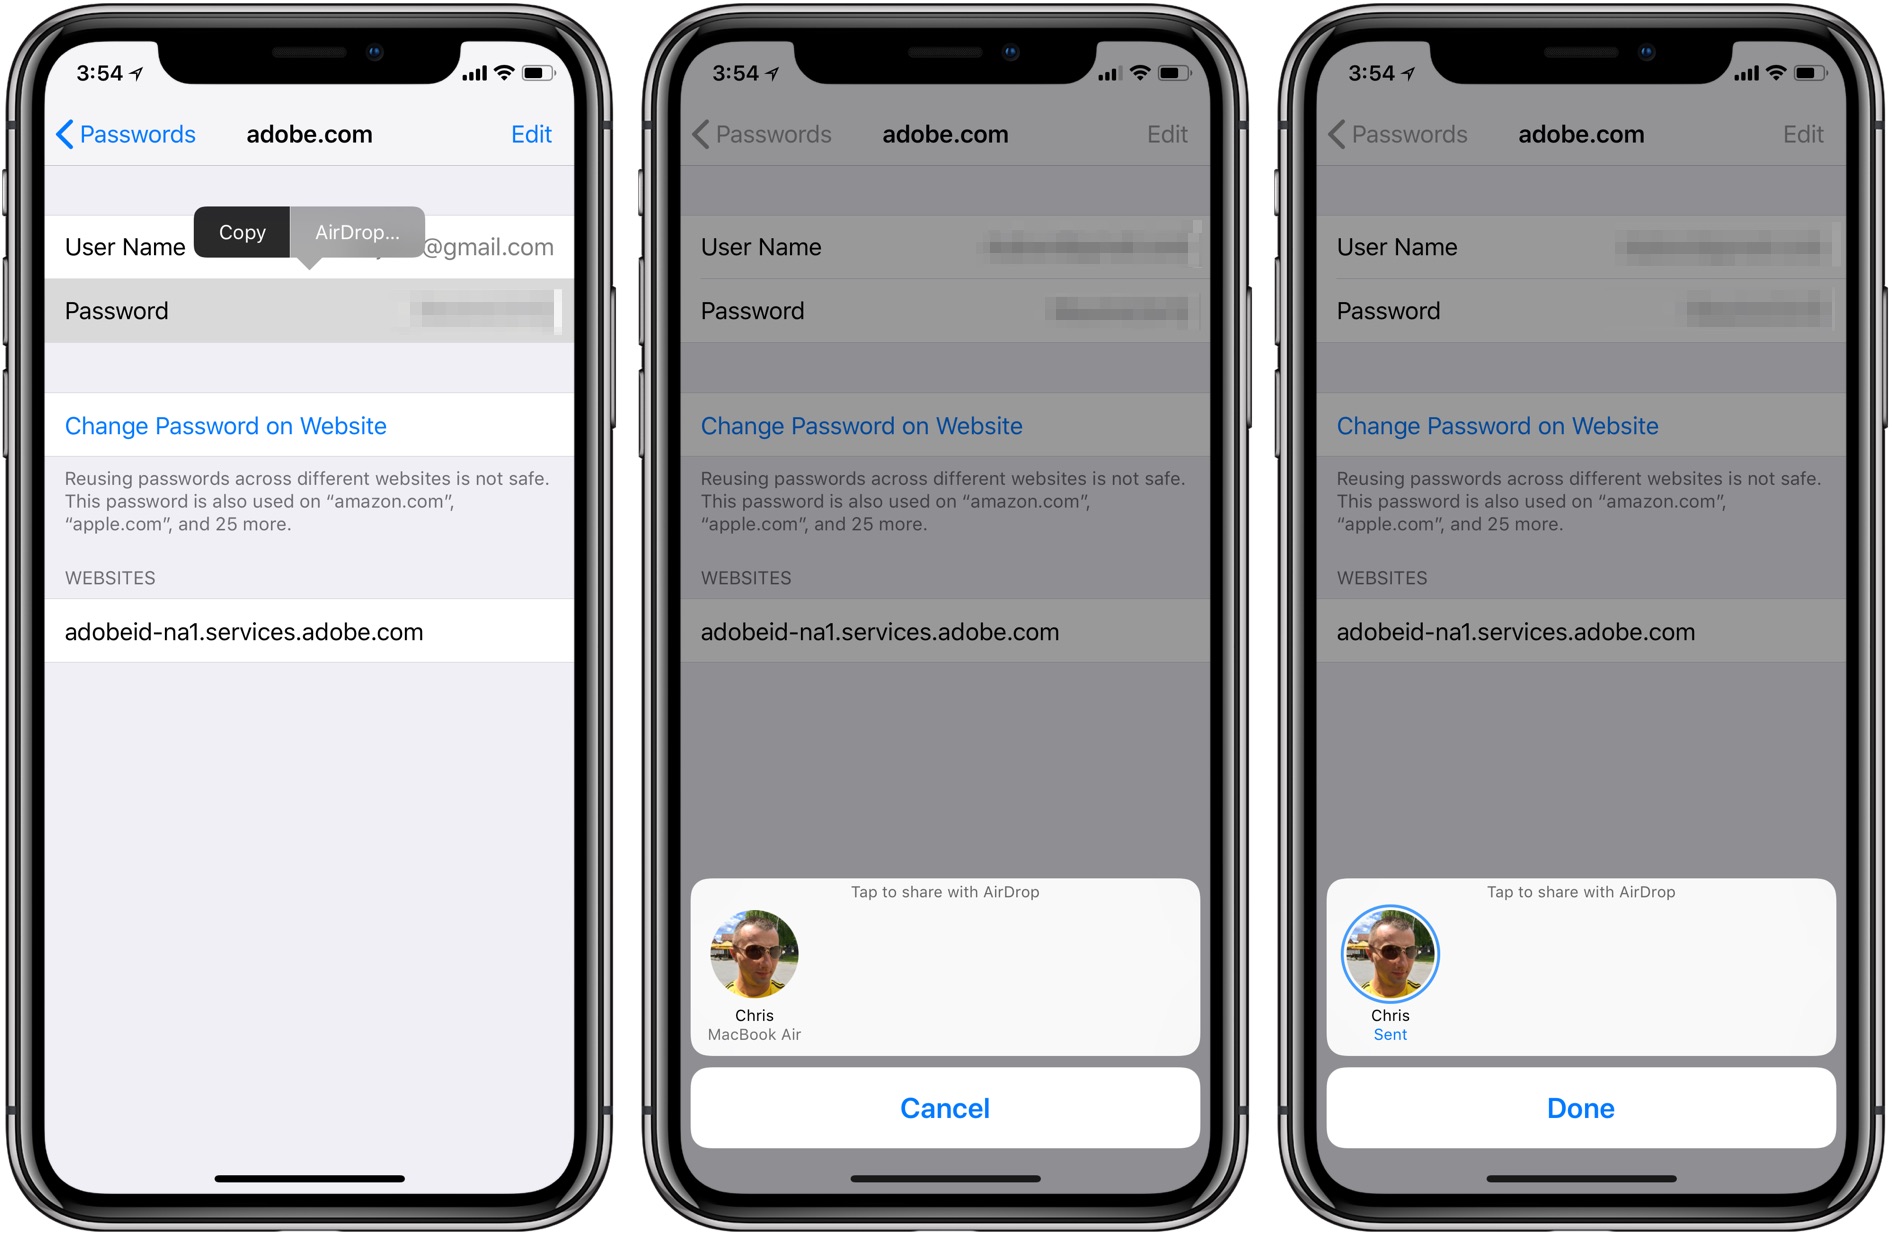 How to AirDrop Passwords Between Nearby iPhone, iPad and Mac devices?